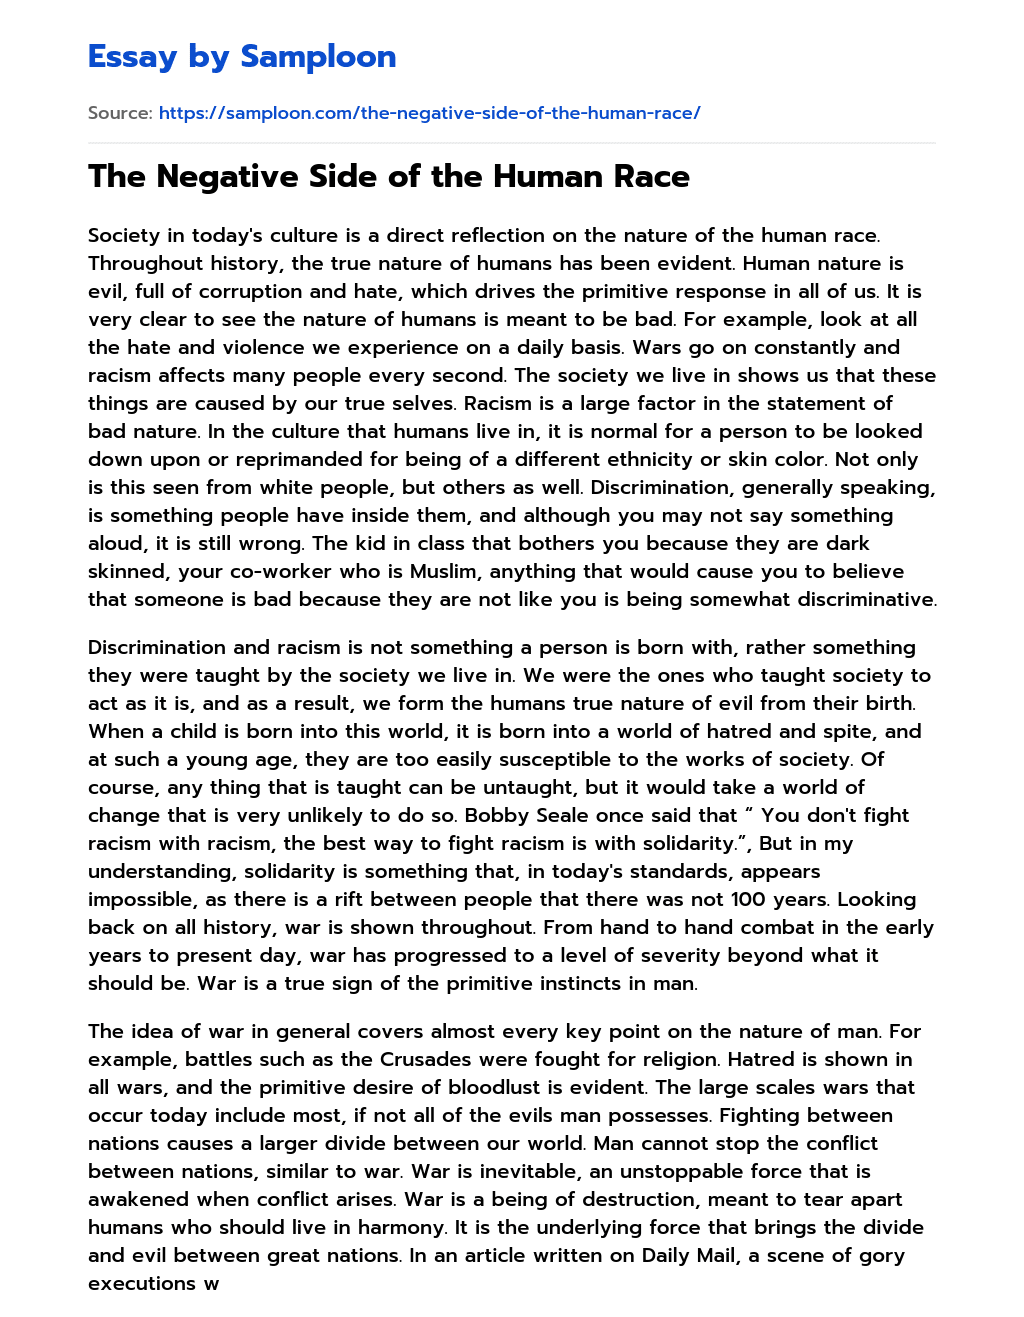 The Negative Side of the Human Race essay